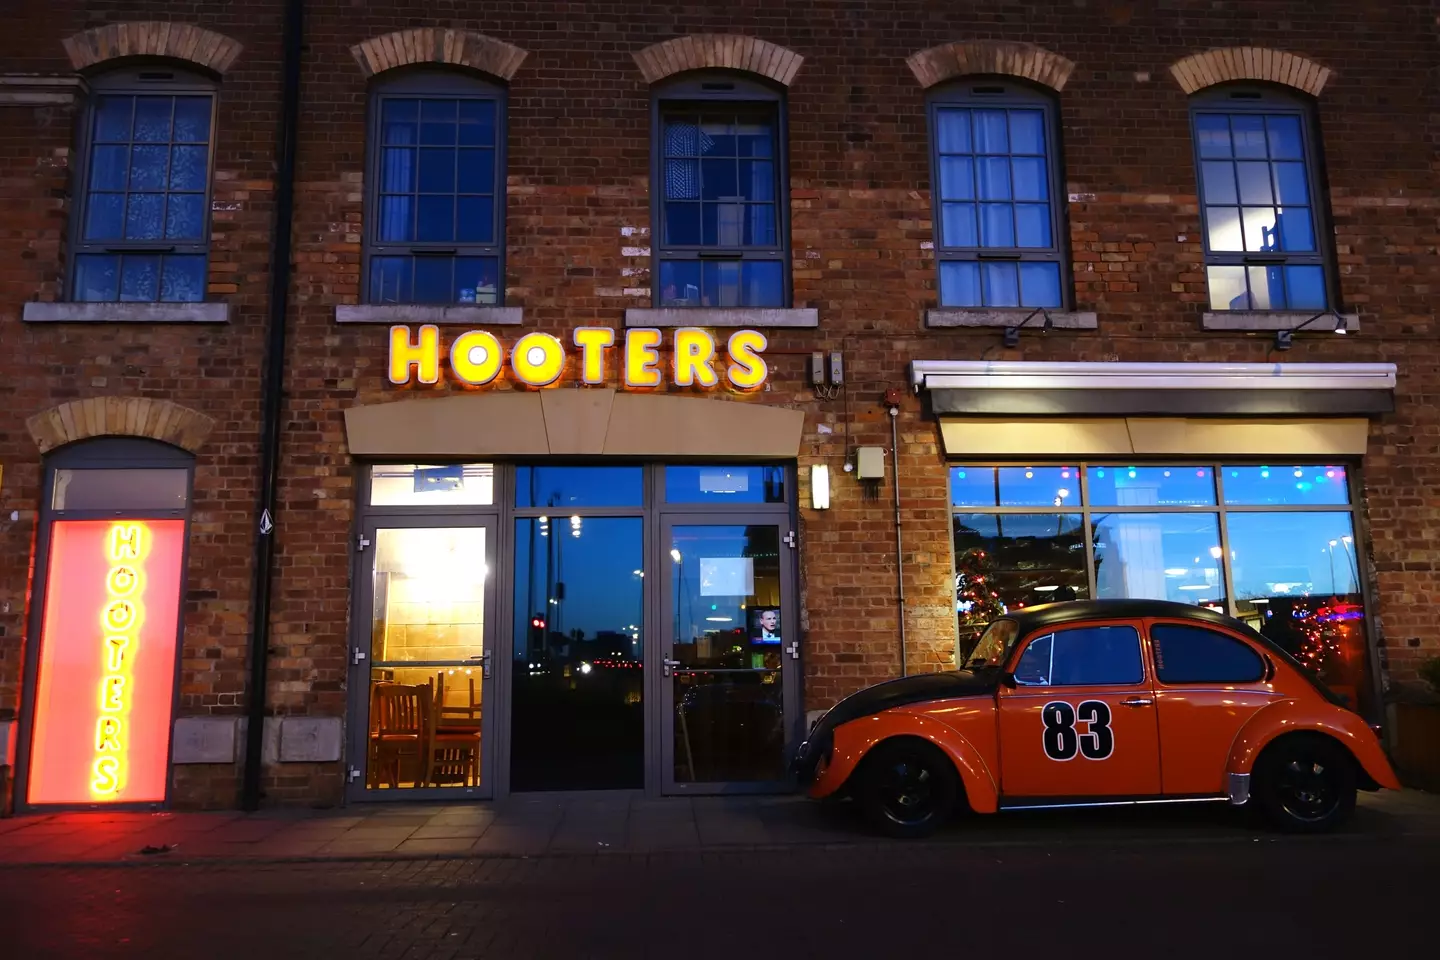 The Hooters branch in Nottingham is currently the only location in the UK.